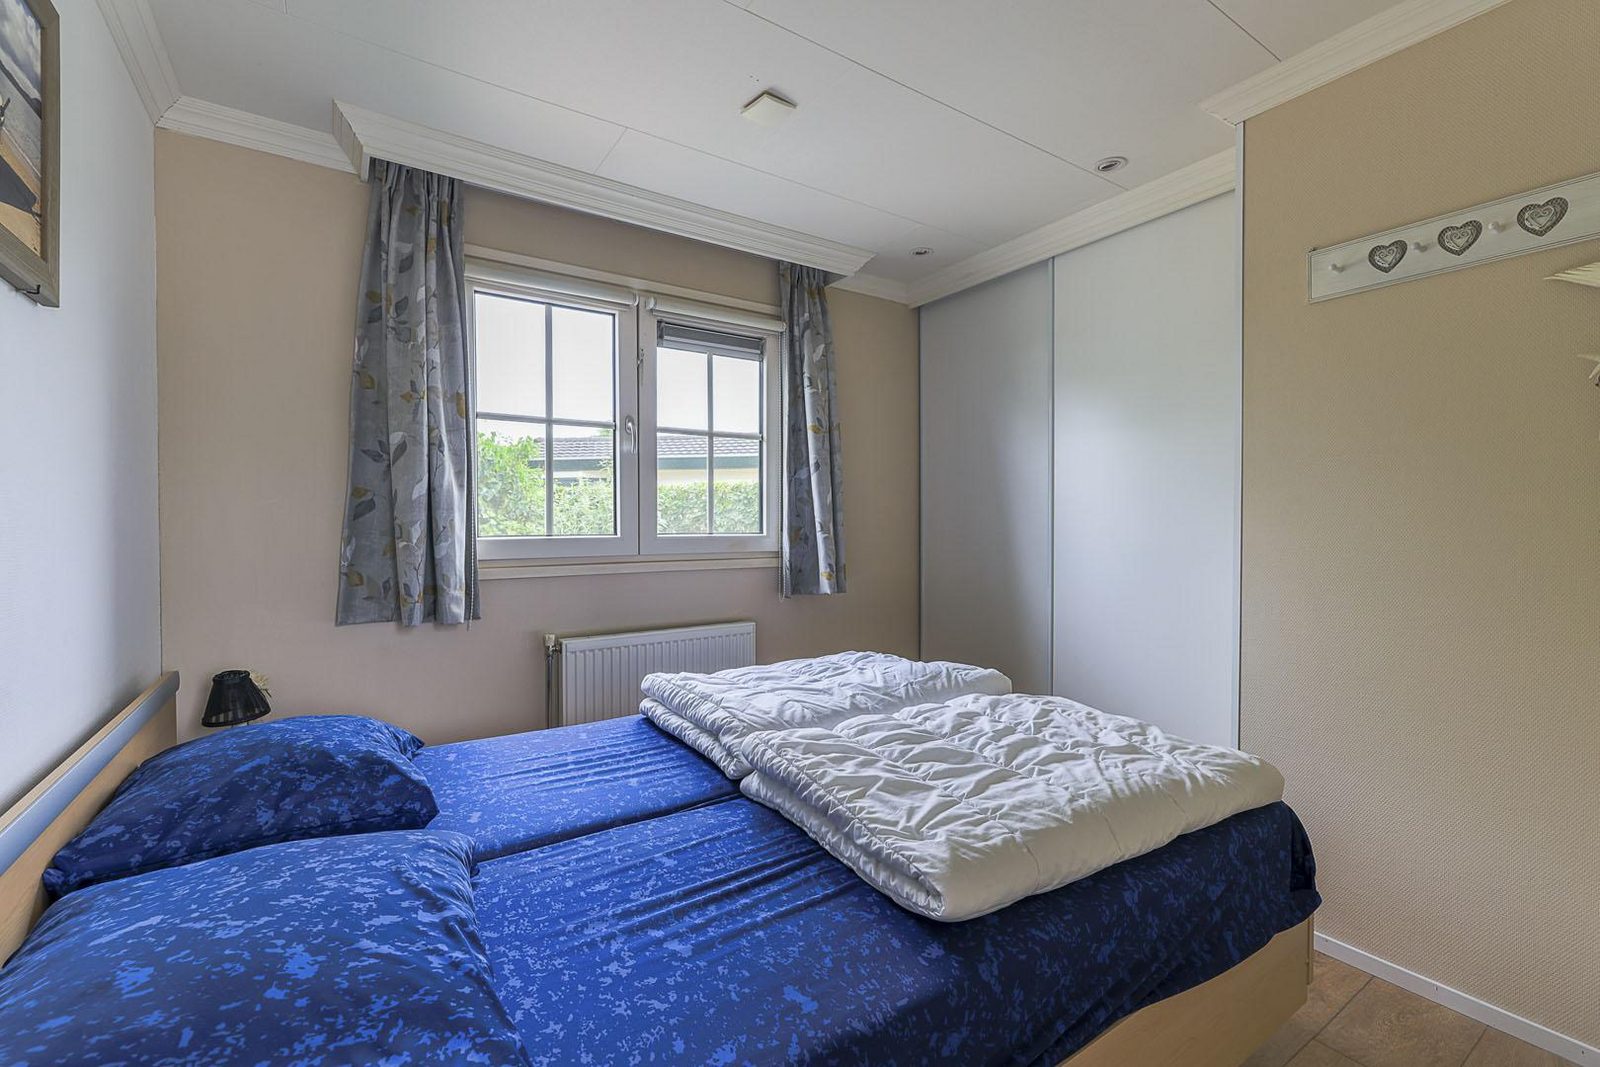 4-person accommodation (without TV), 2 bedrooms